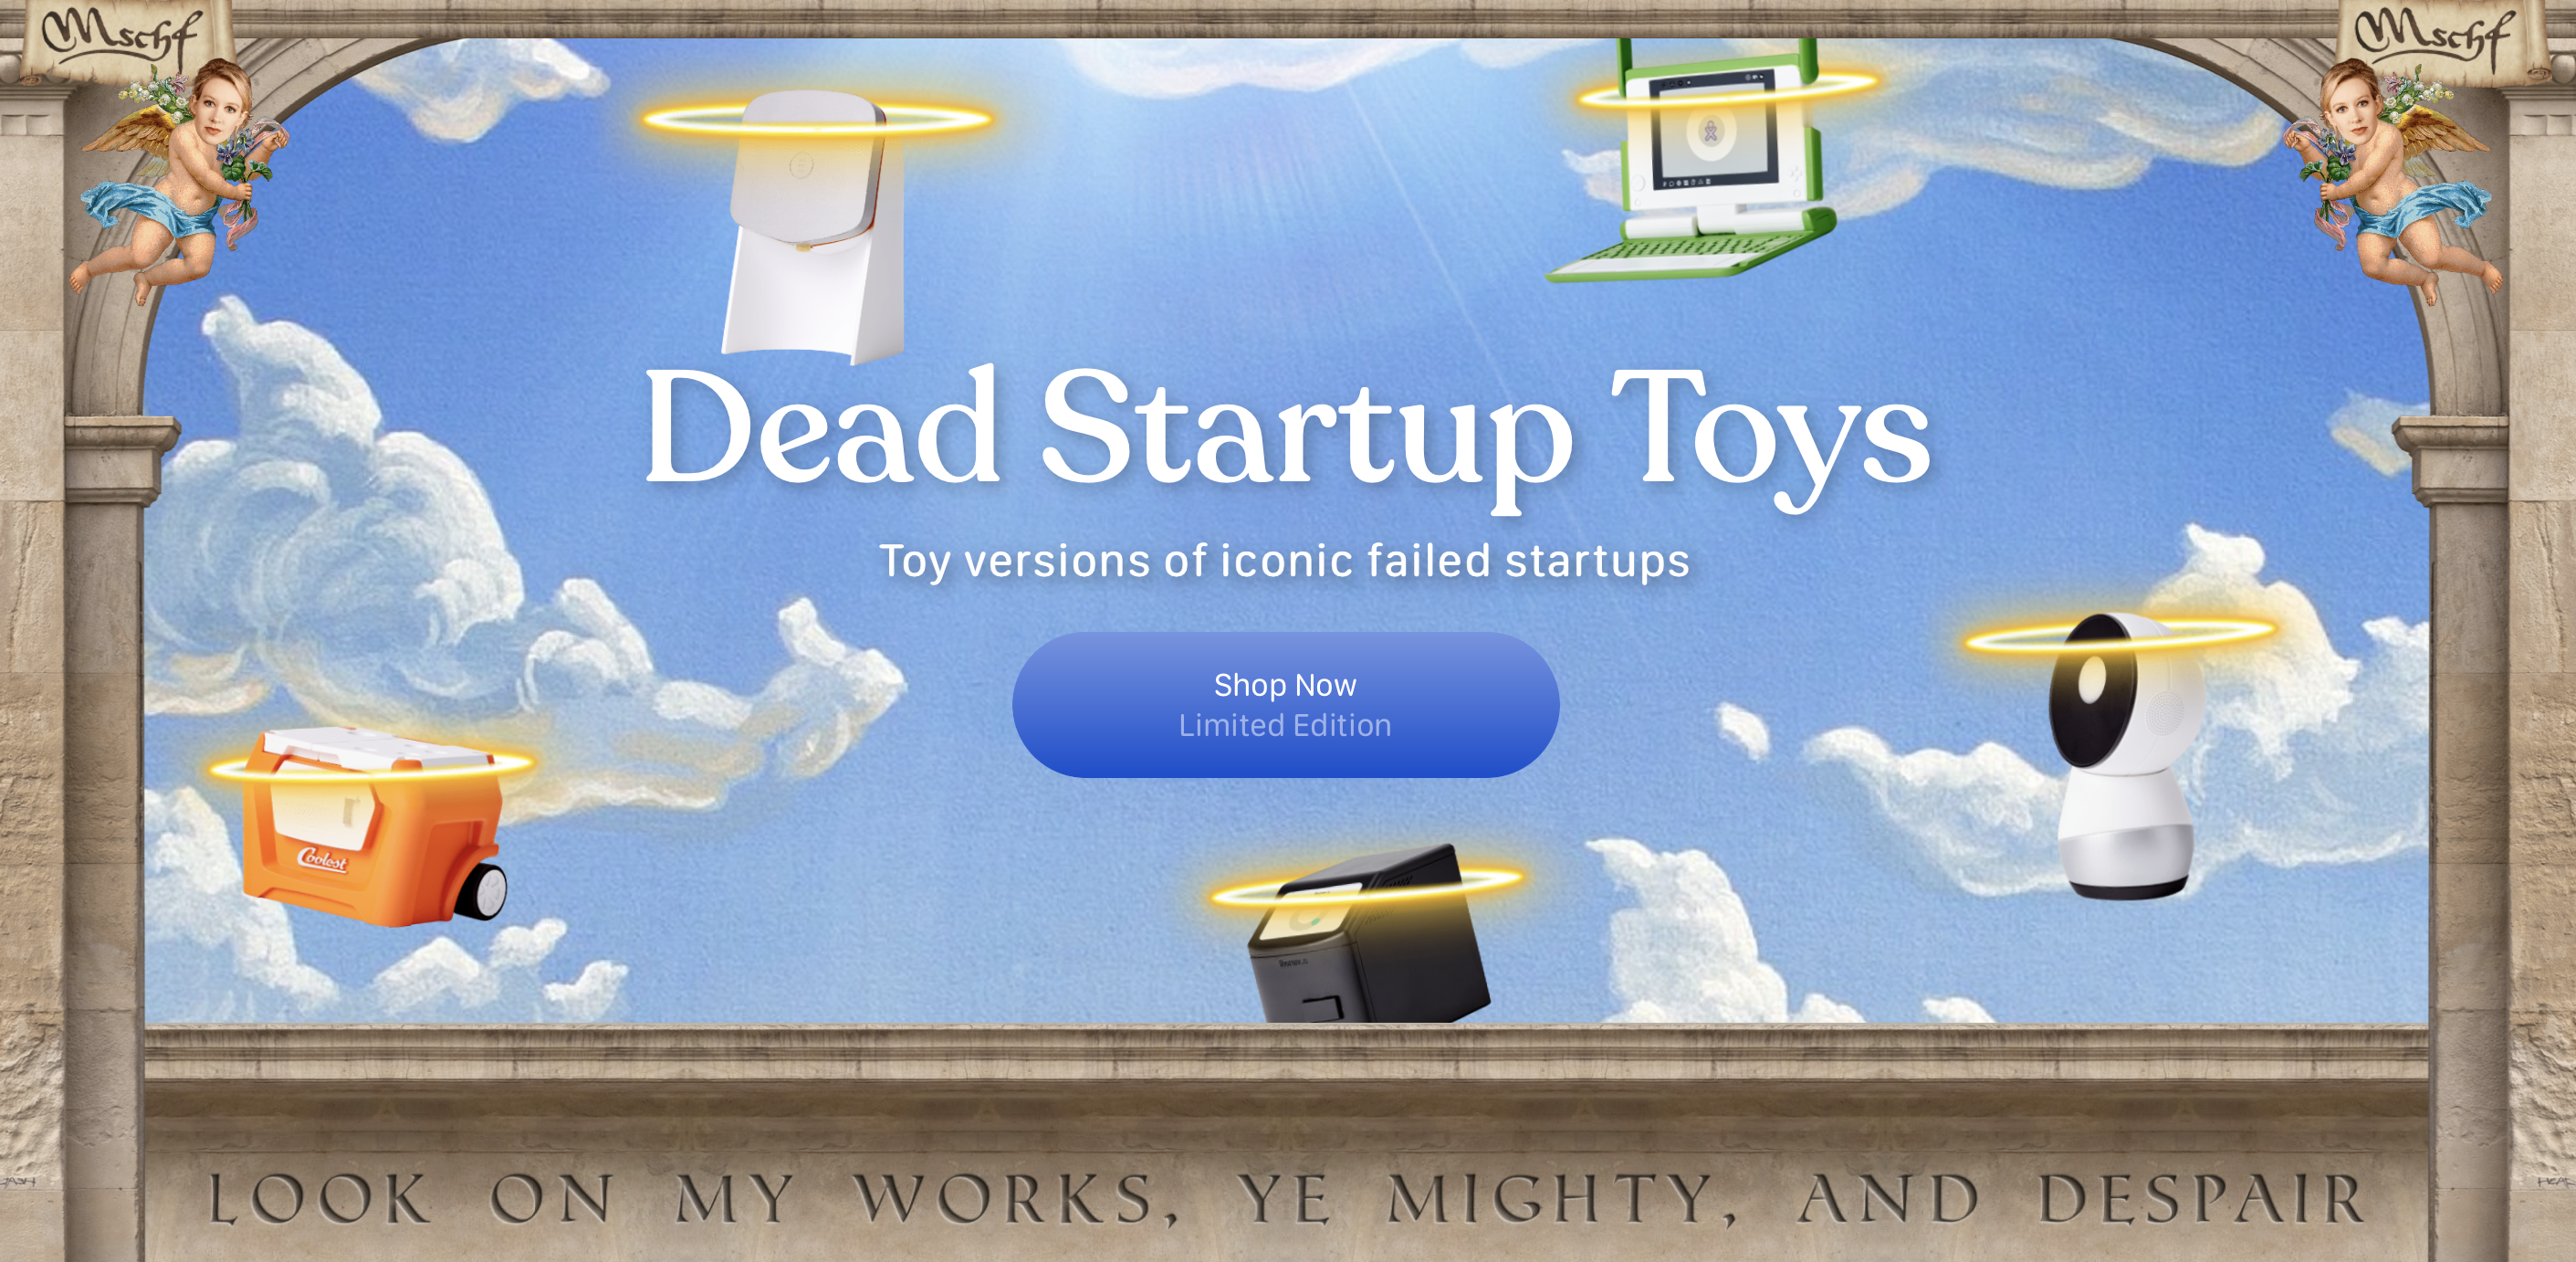 A screenshot of the homepage for Dead Startup Toys, which sells toy versions of failed startup products.